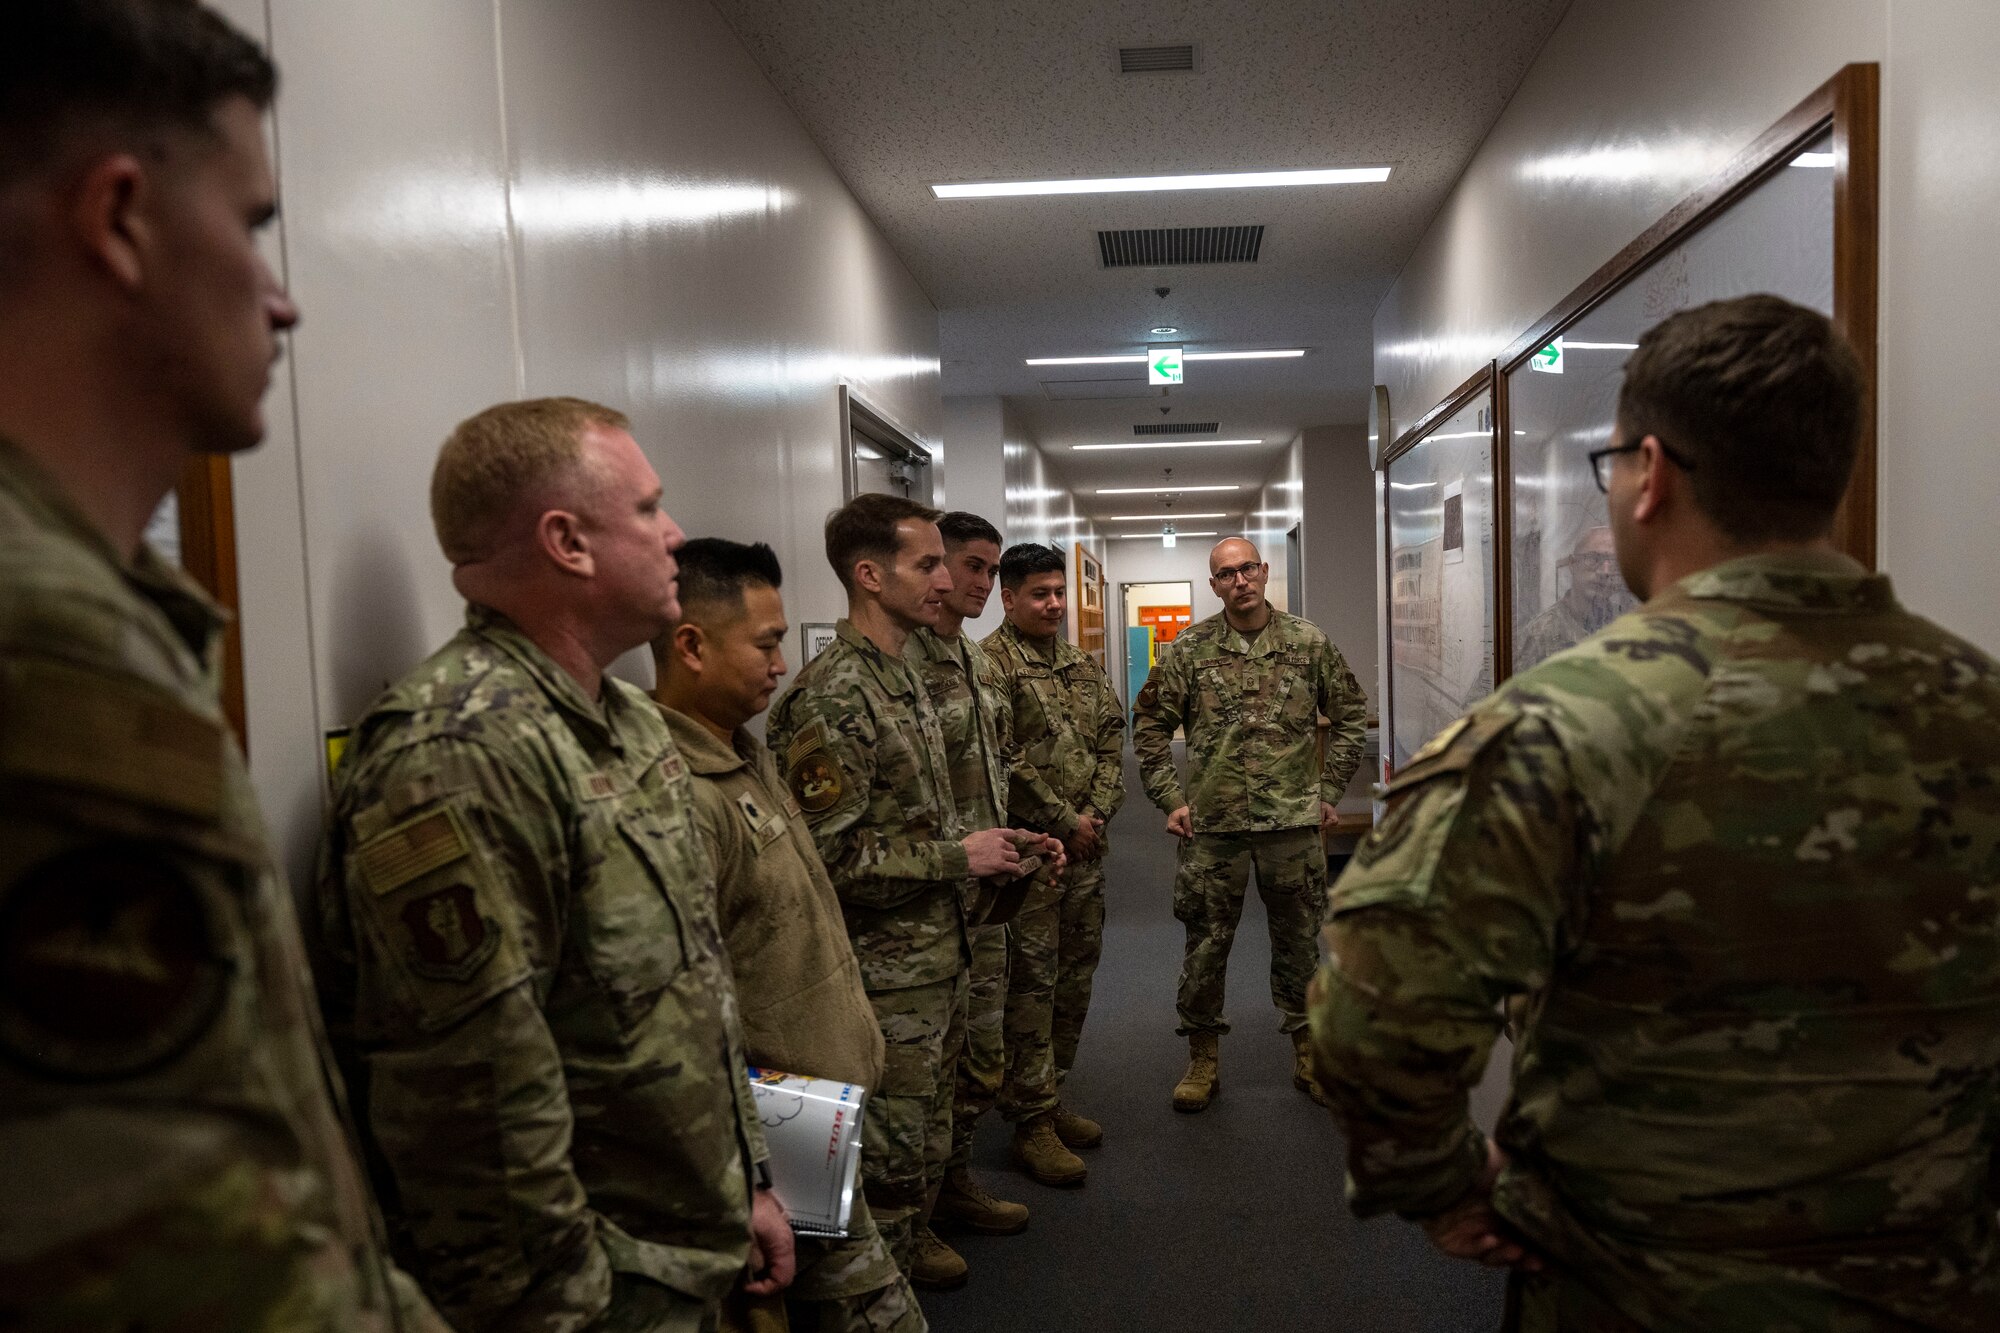 Members of the 35th Civil Engineering Squadron electrical systems flight explain power outage procedures using maps during a Wild Weasel Walk-through at Misawa Air Base, Japan.